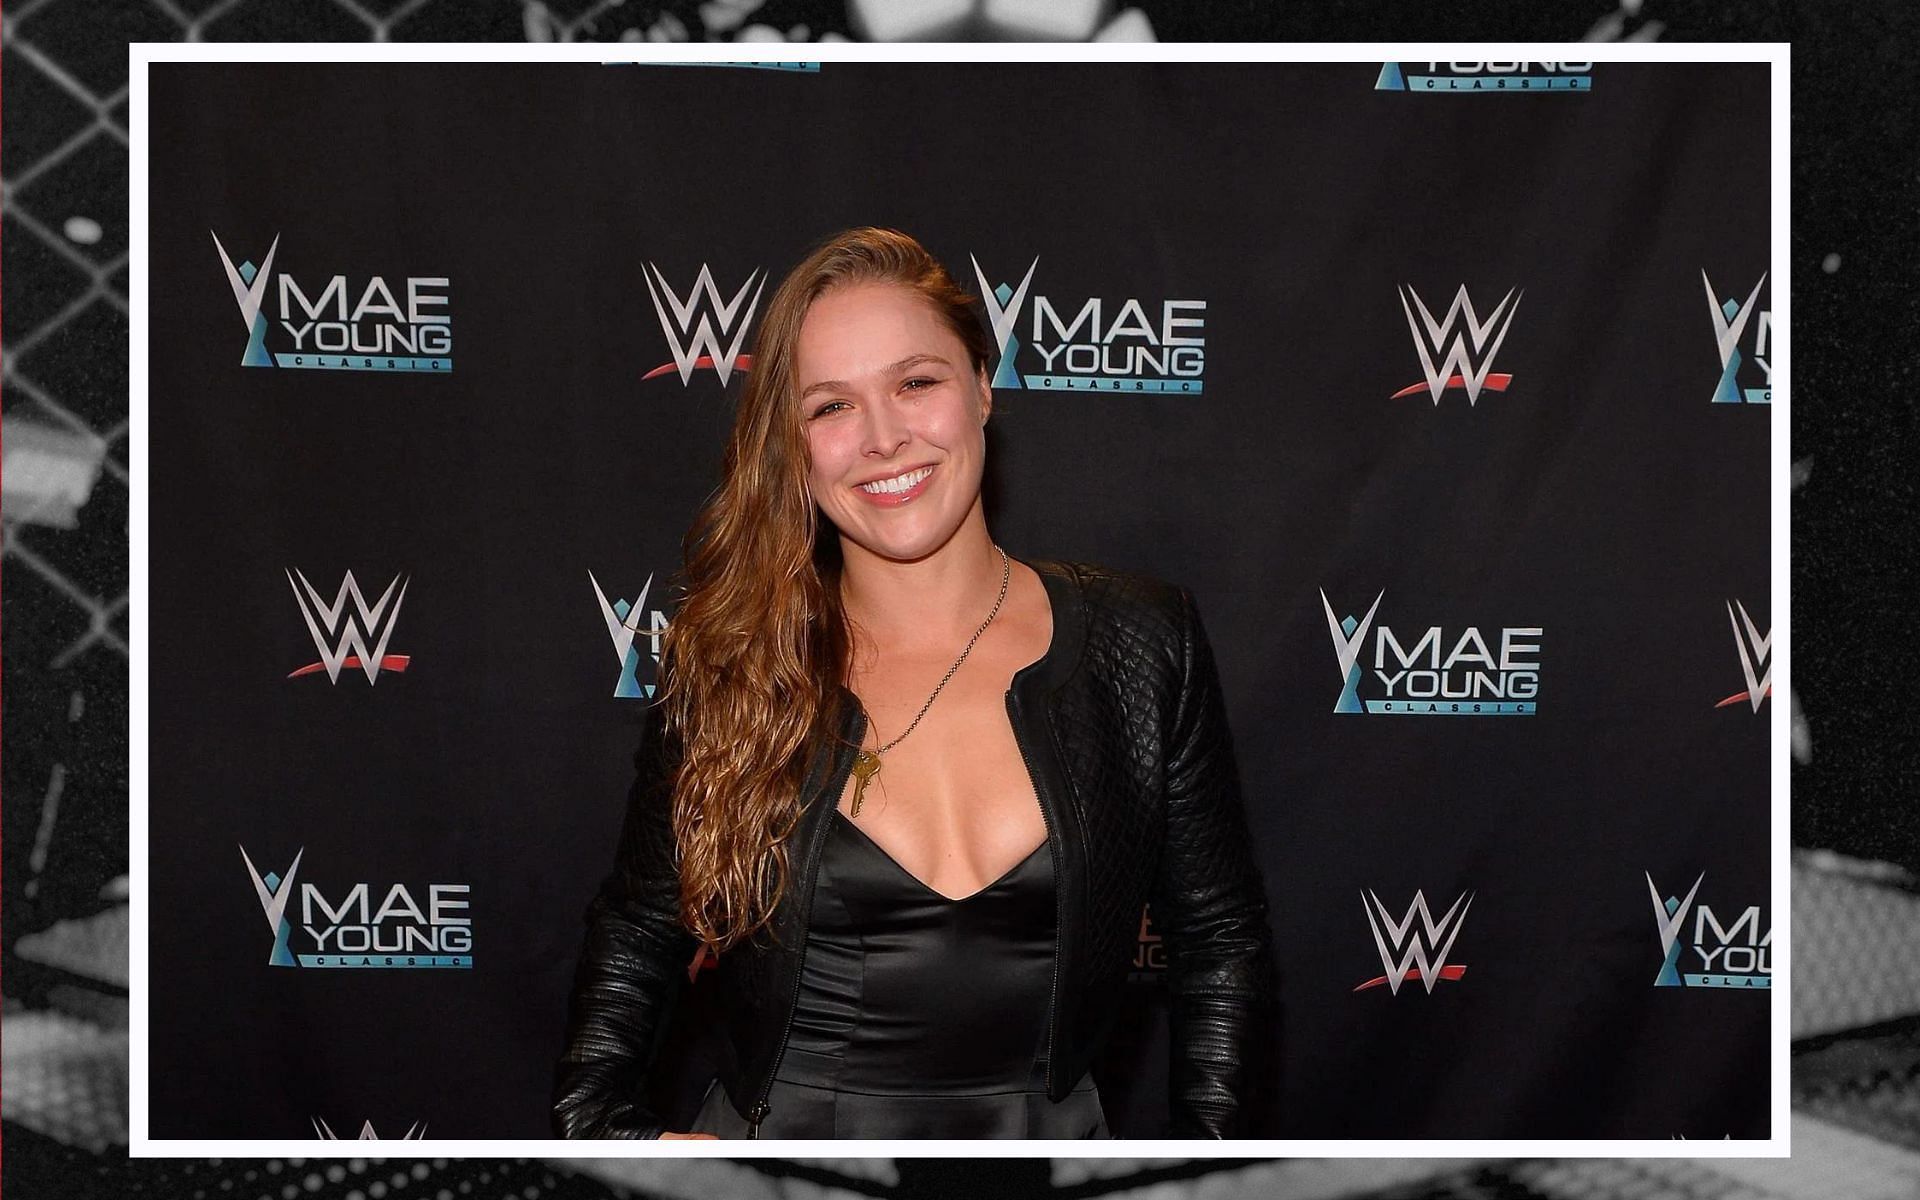 Ronda Rousey reveals about her past relationship with Brendan Schaub. [Image courtesy: Getty Images]